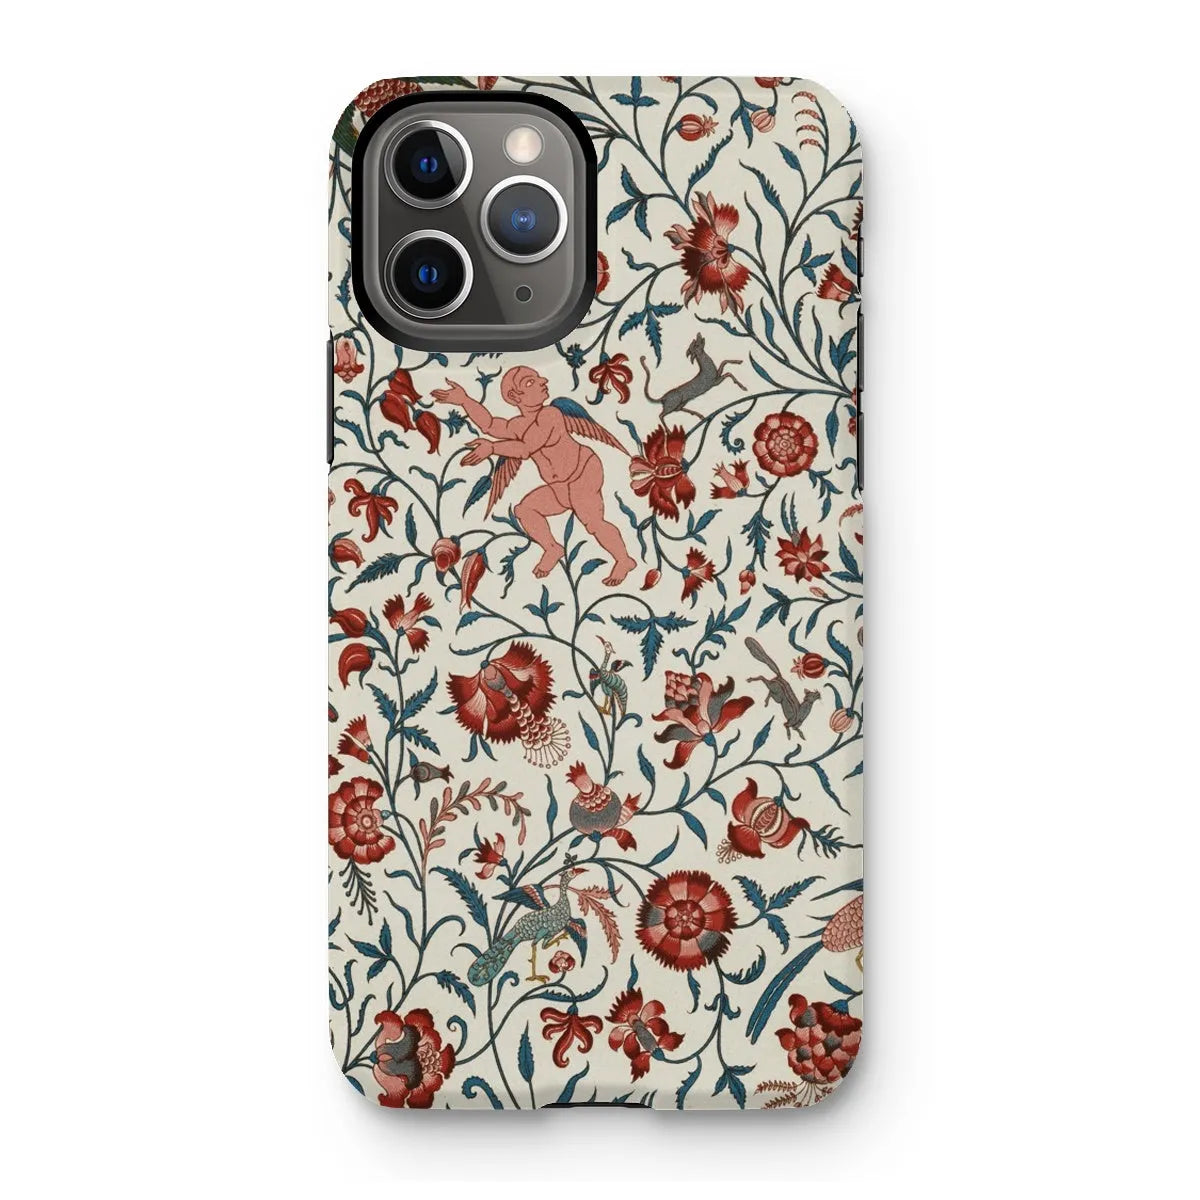 Persian Pattern From L’ornement Polychrome By Auguste Racinet Tough Phone Case - Iphone 11 Pro / Matte - Mobile Phone